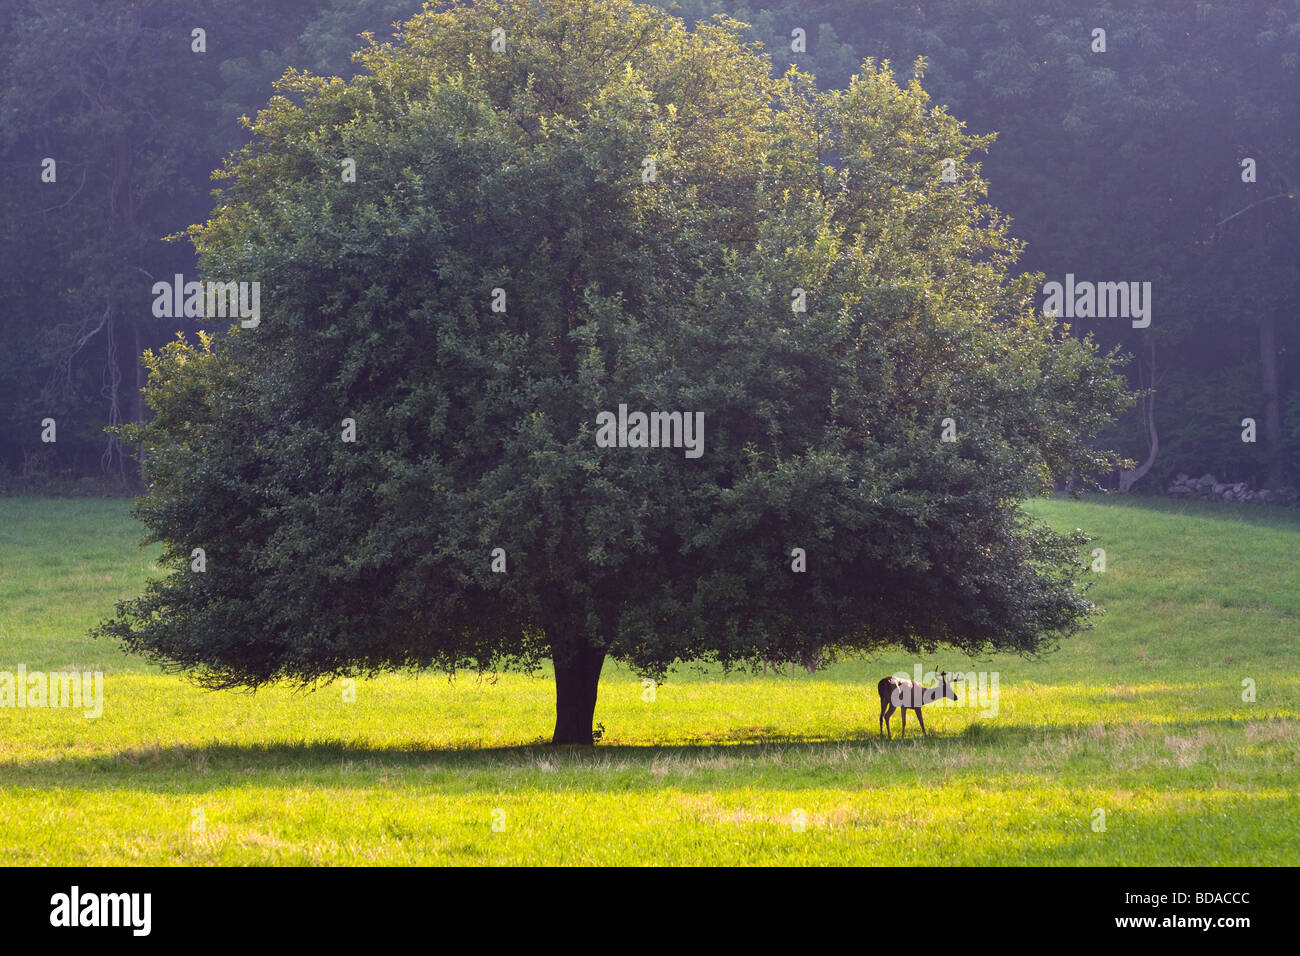 A young Stag under a tree in Orange Connecticut USA Stock Photo